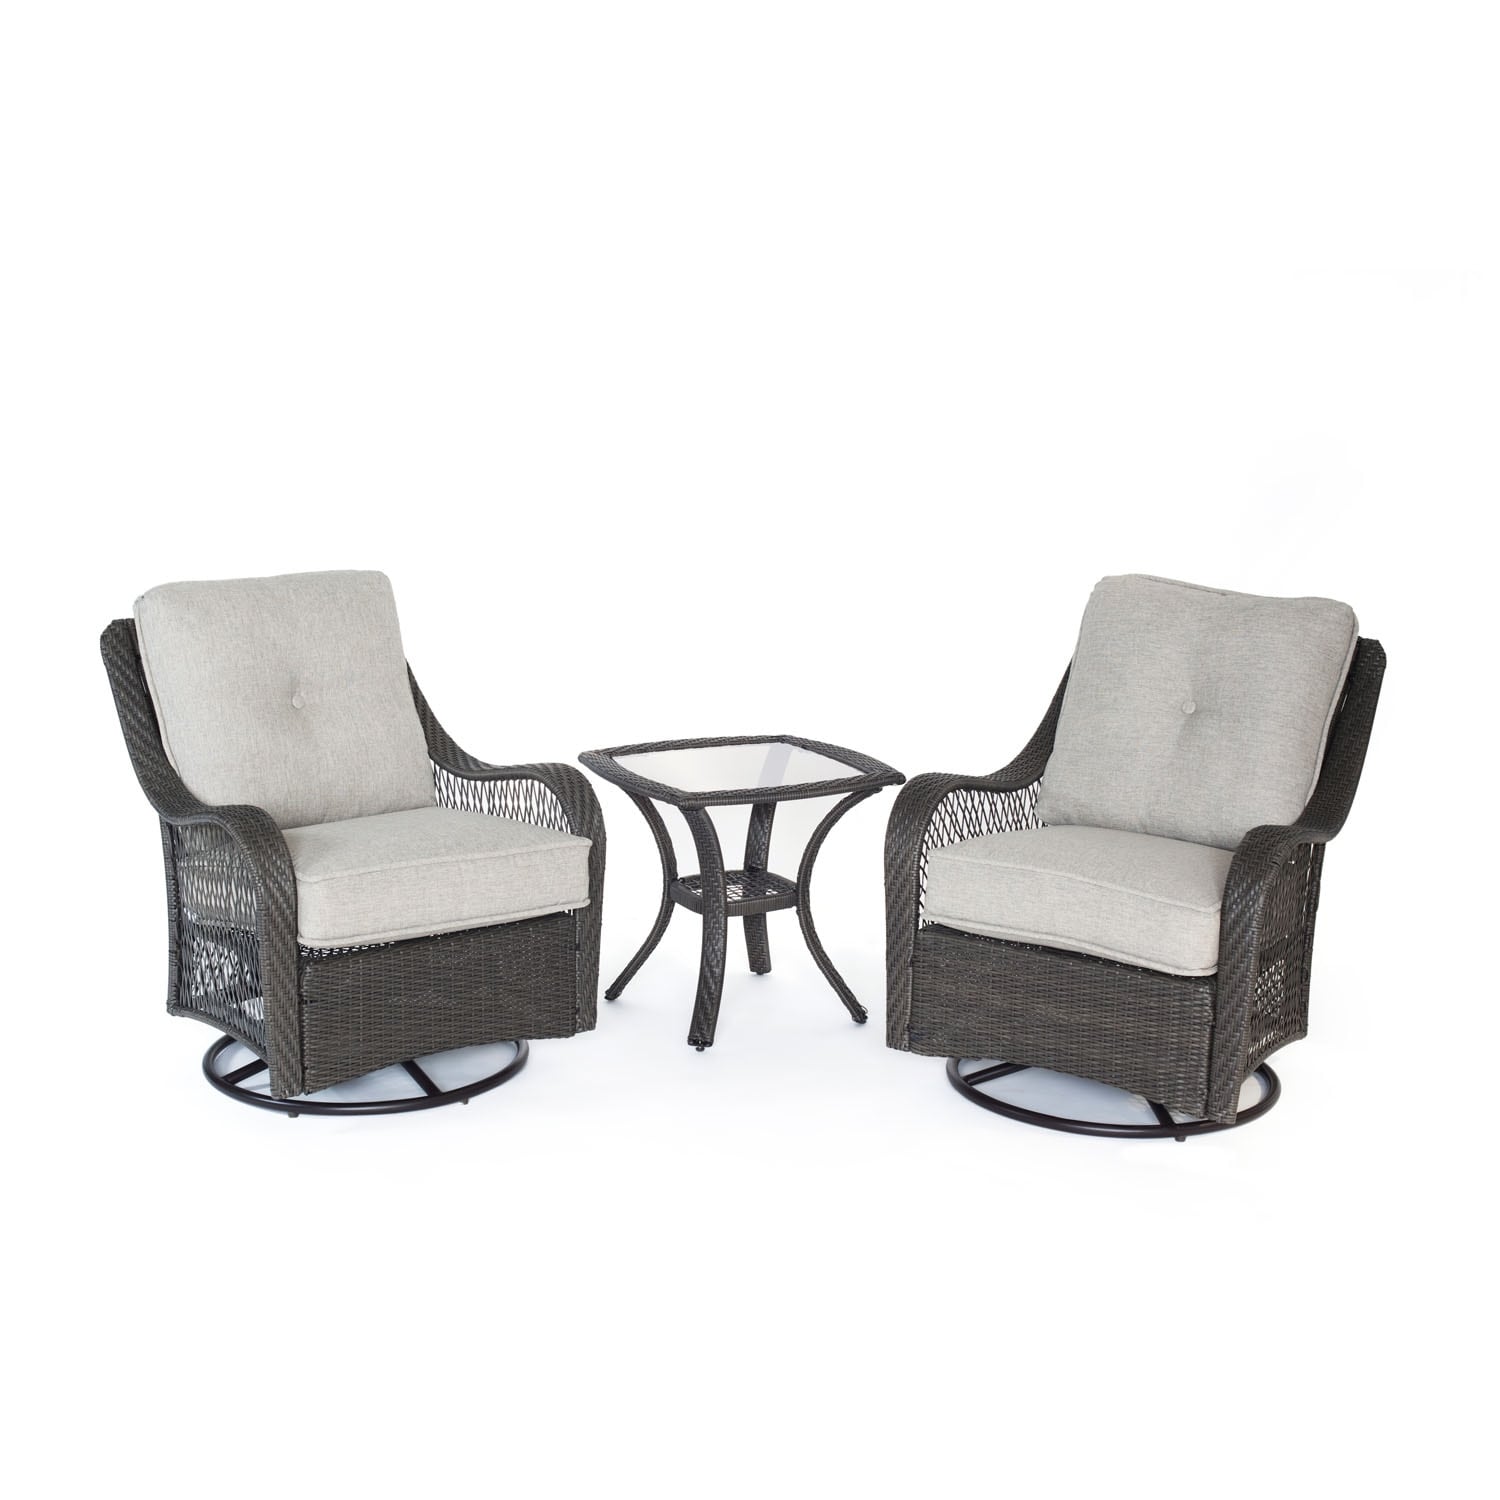 Hanover Outdoor Orleans 3-piece Swivel Rocking Chat Set In Silver Lining